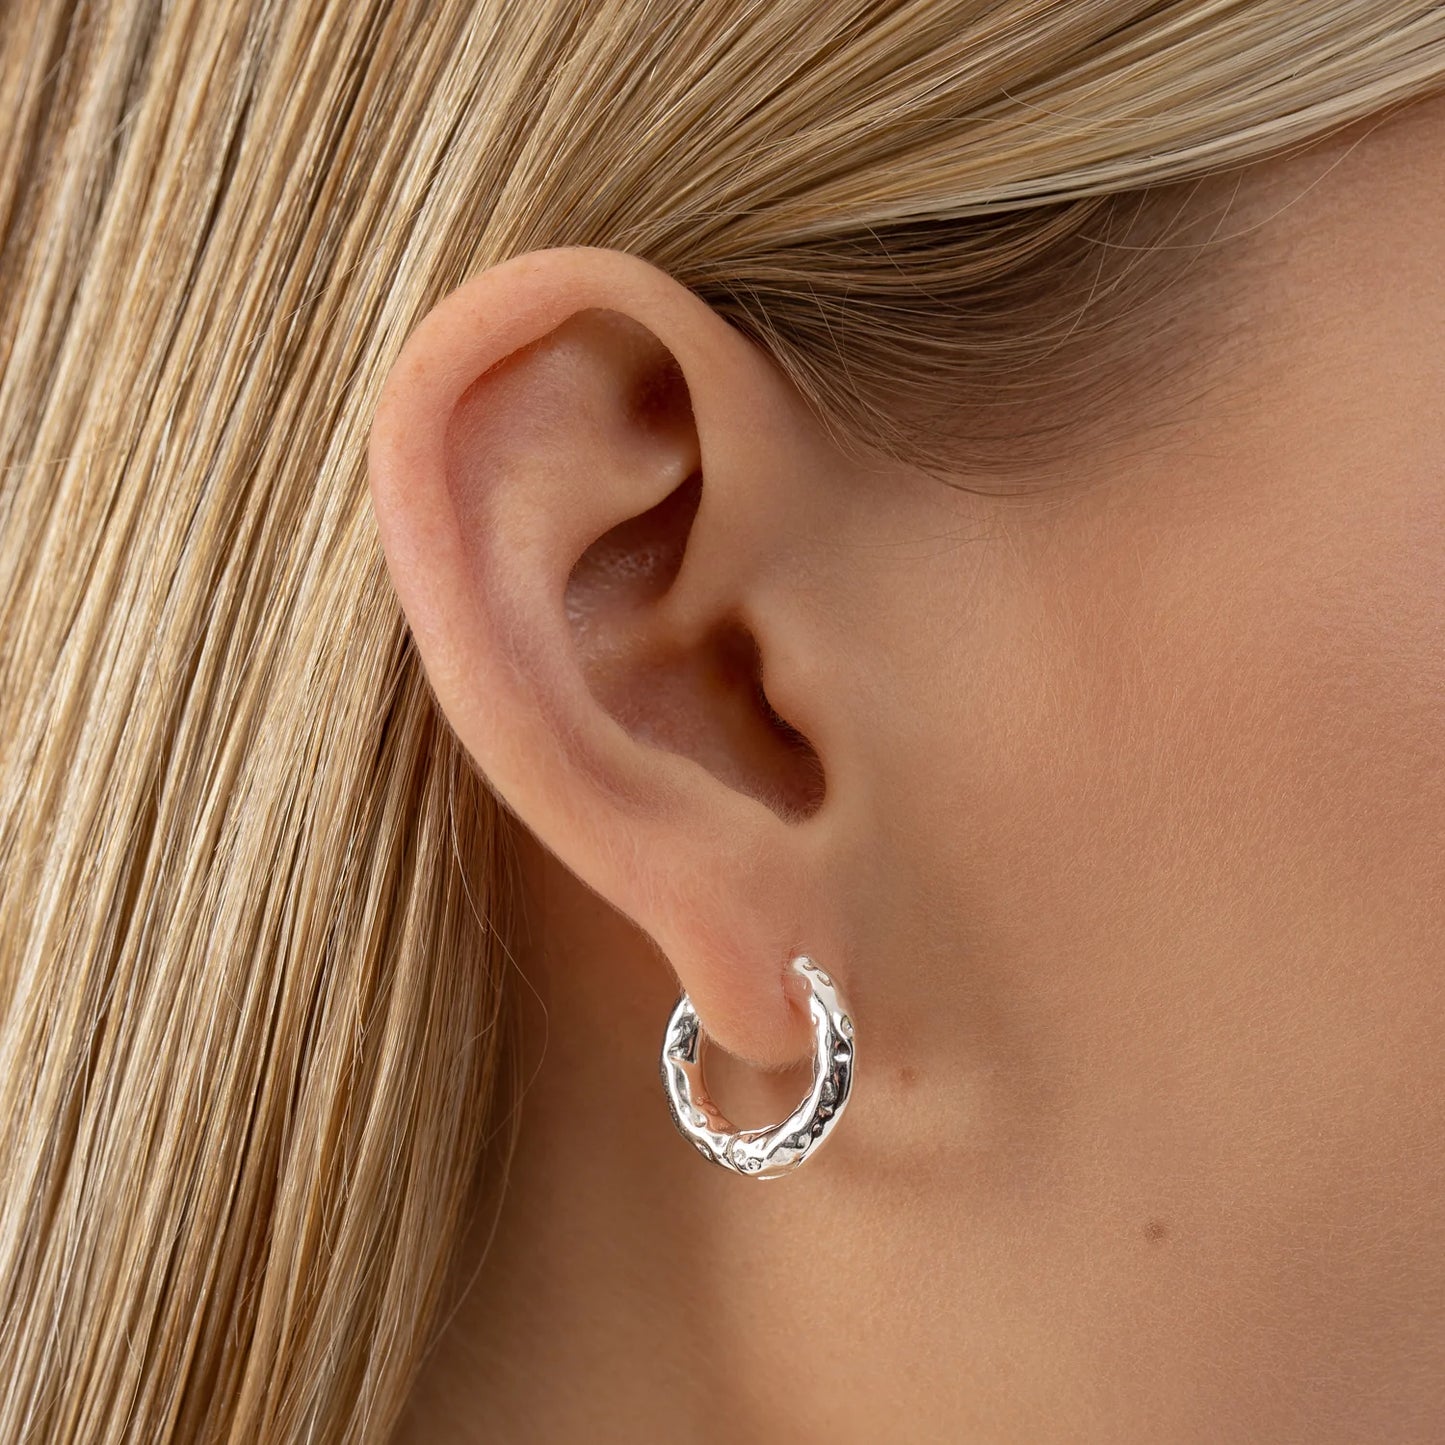 Close-up of ONEHE sustainable Hoop Earrings FRIDA in silver, made from recycled 925 sterling silver. Hypoallergenic, elegant, and minimalist design, 17 x 17 mm size, 2.9 g weight.